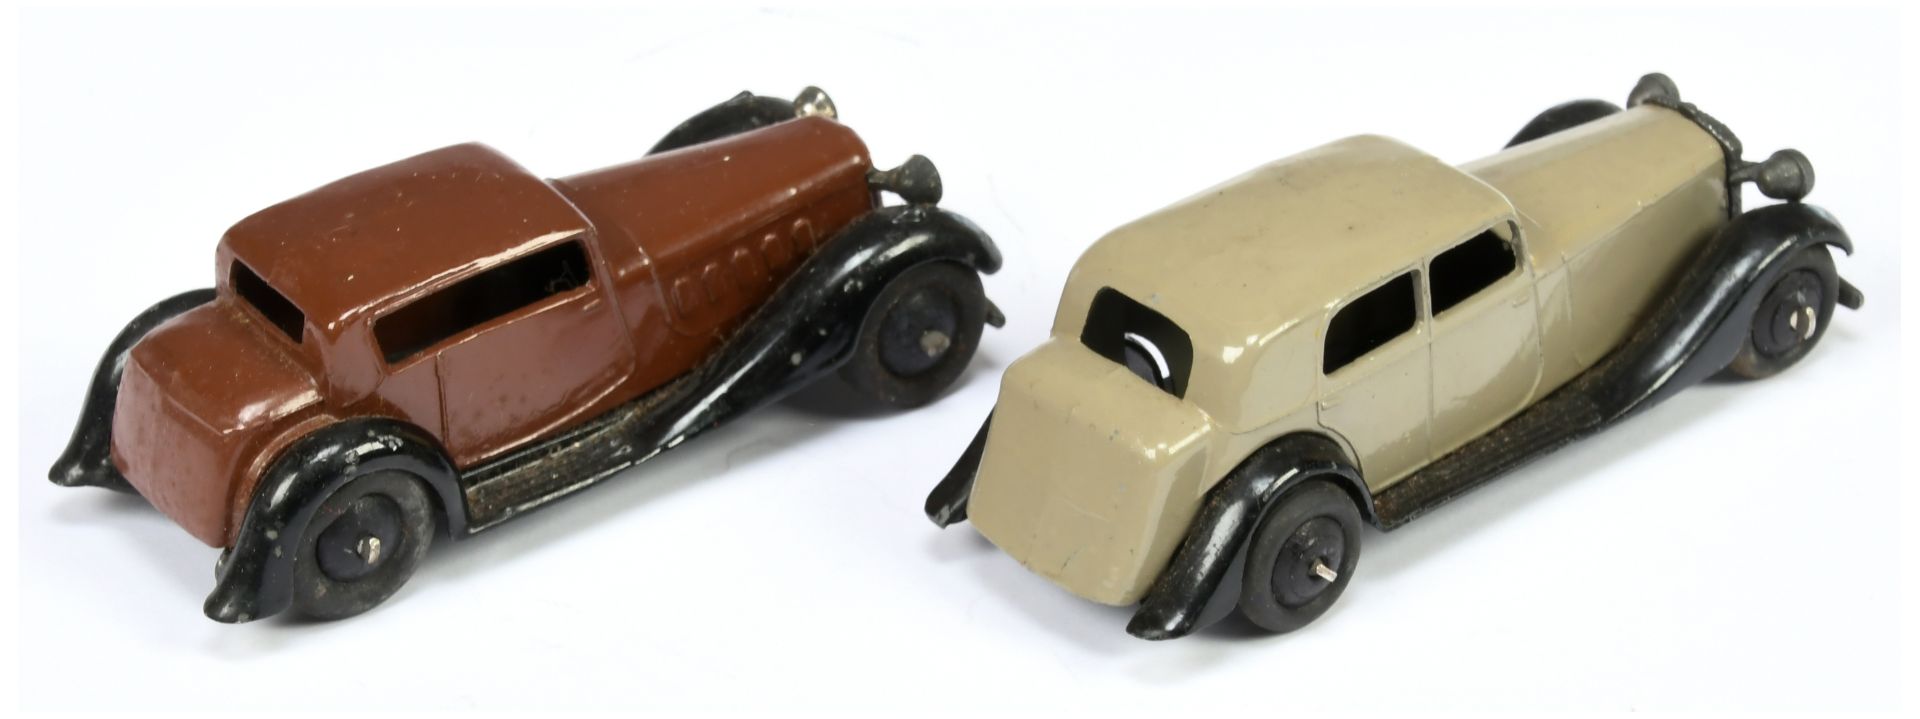 Dinky 30c Daimler - green, black chassis and ridged hubs - Image 2 of 2